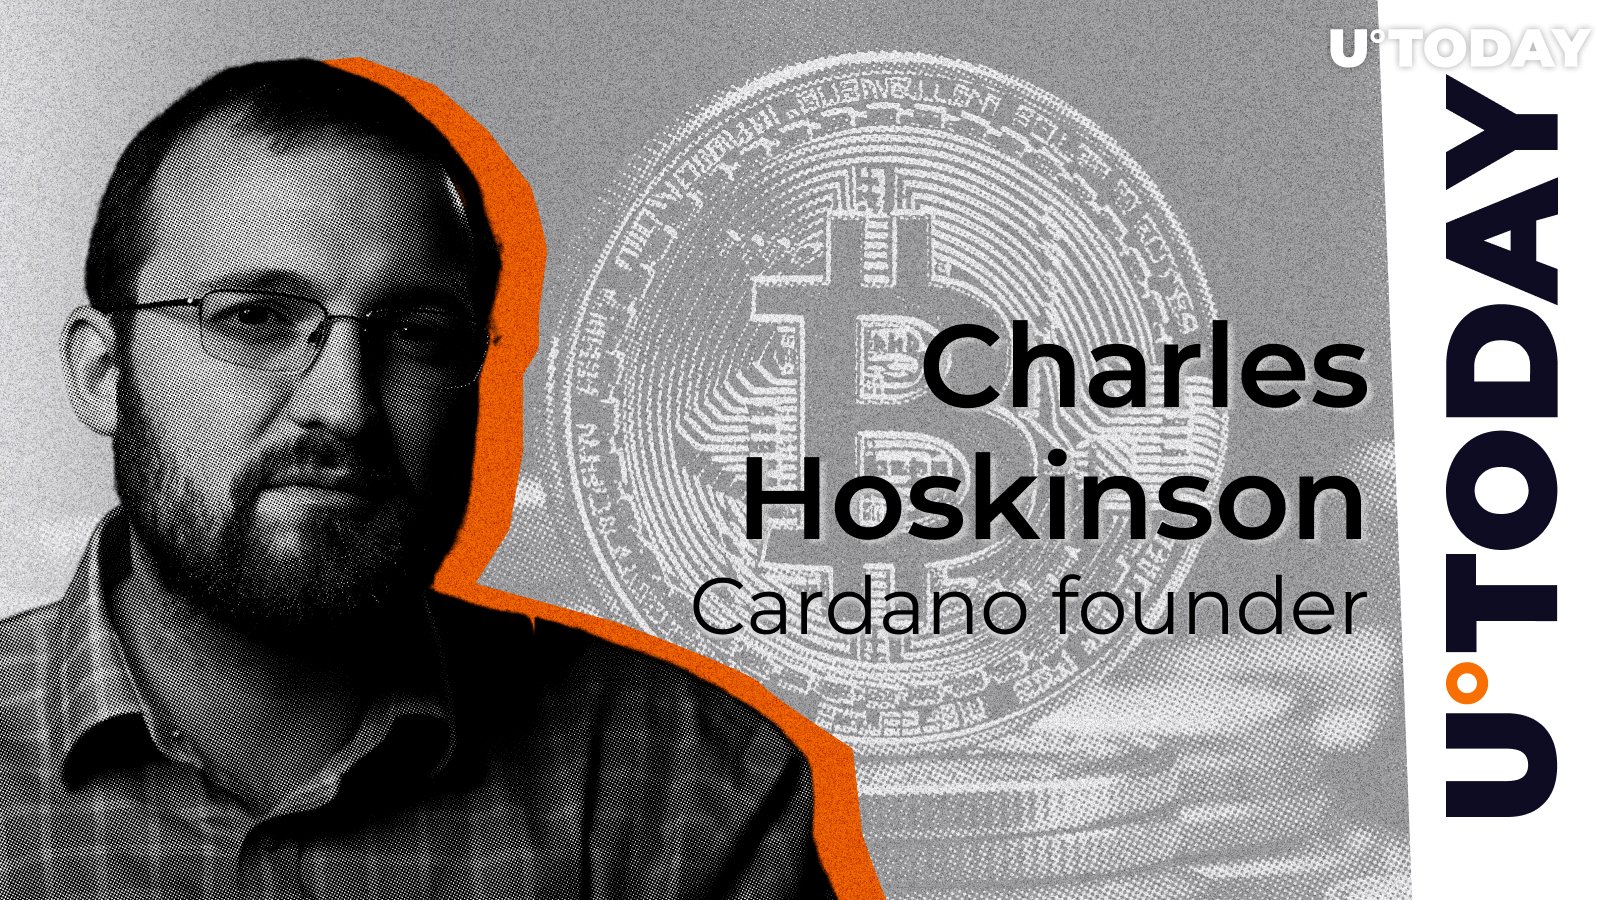 Cardano Founder Makes Unexpected Bitcoin Statement